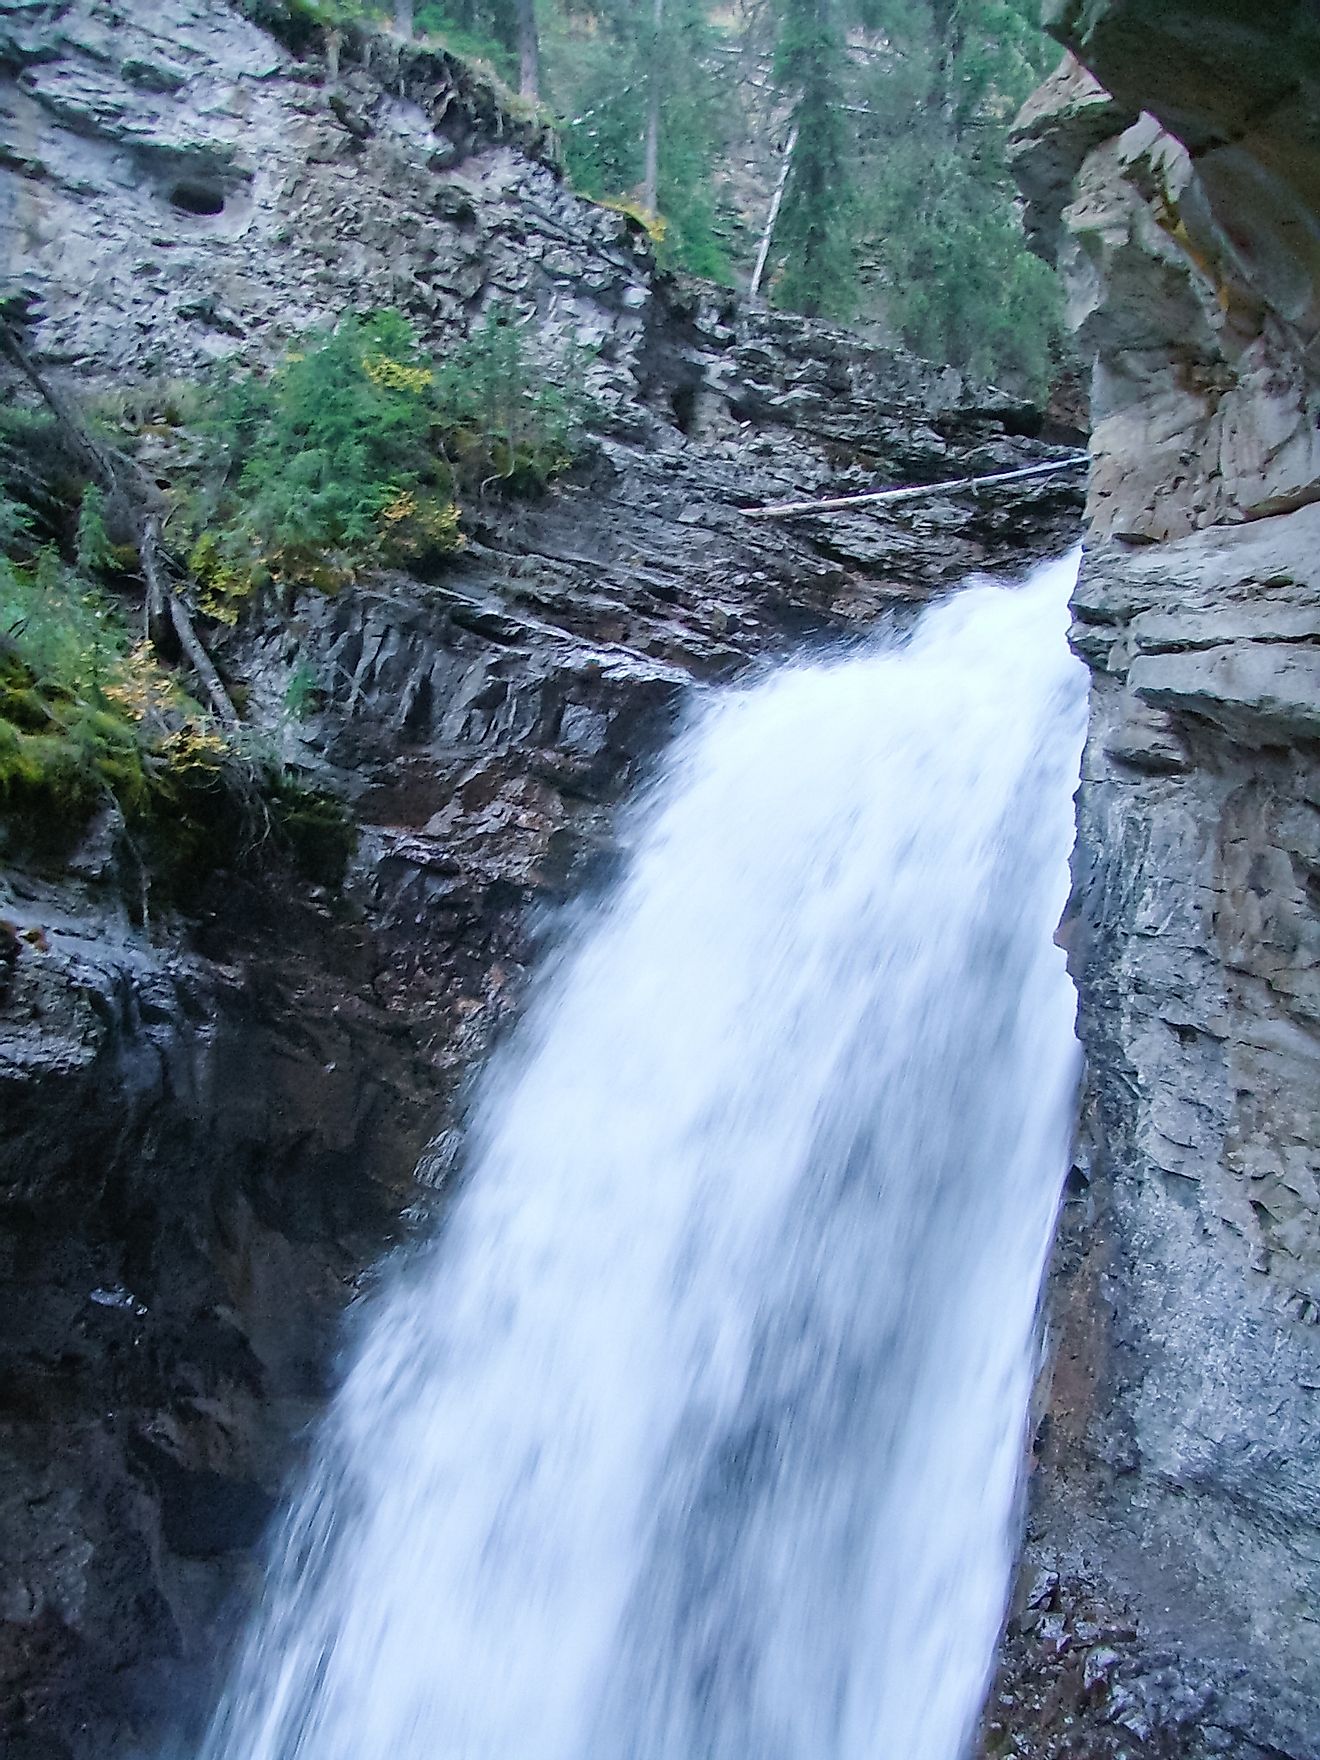 The waters passing through Johnston Canyon and its falls in Alberta's Banff National Park ultimately drain into the Bow River.